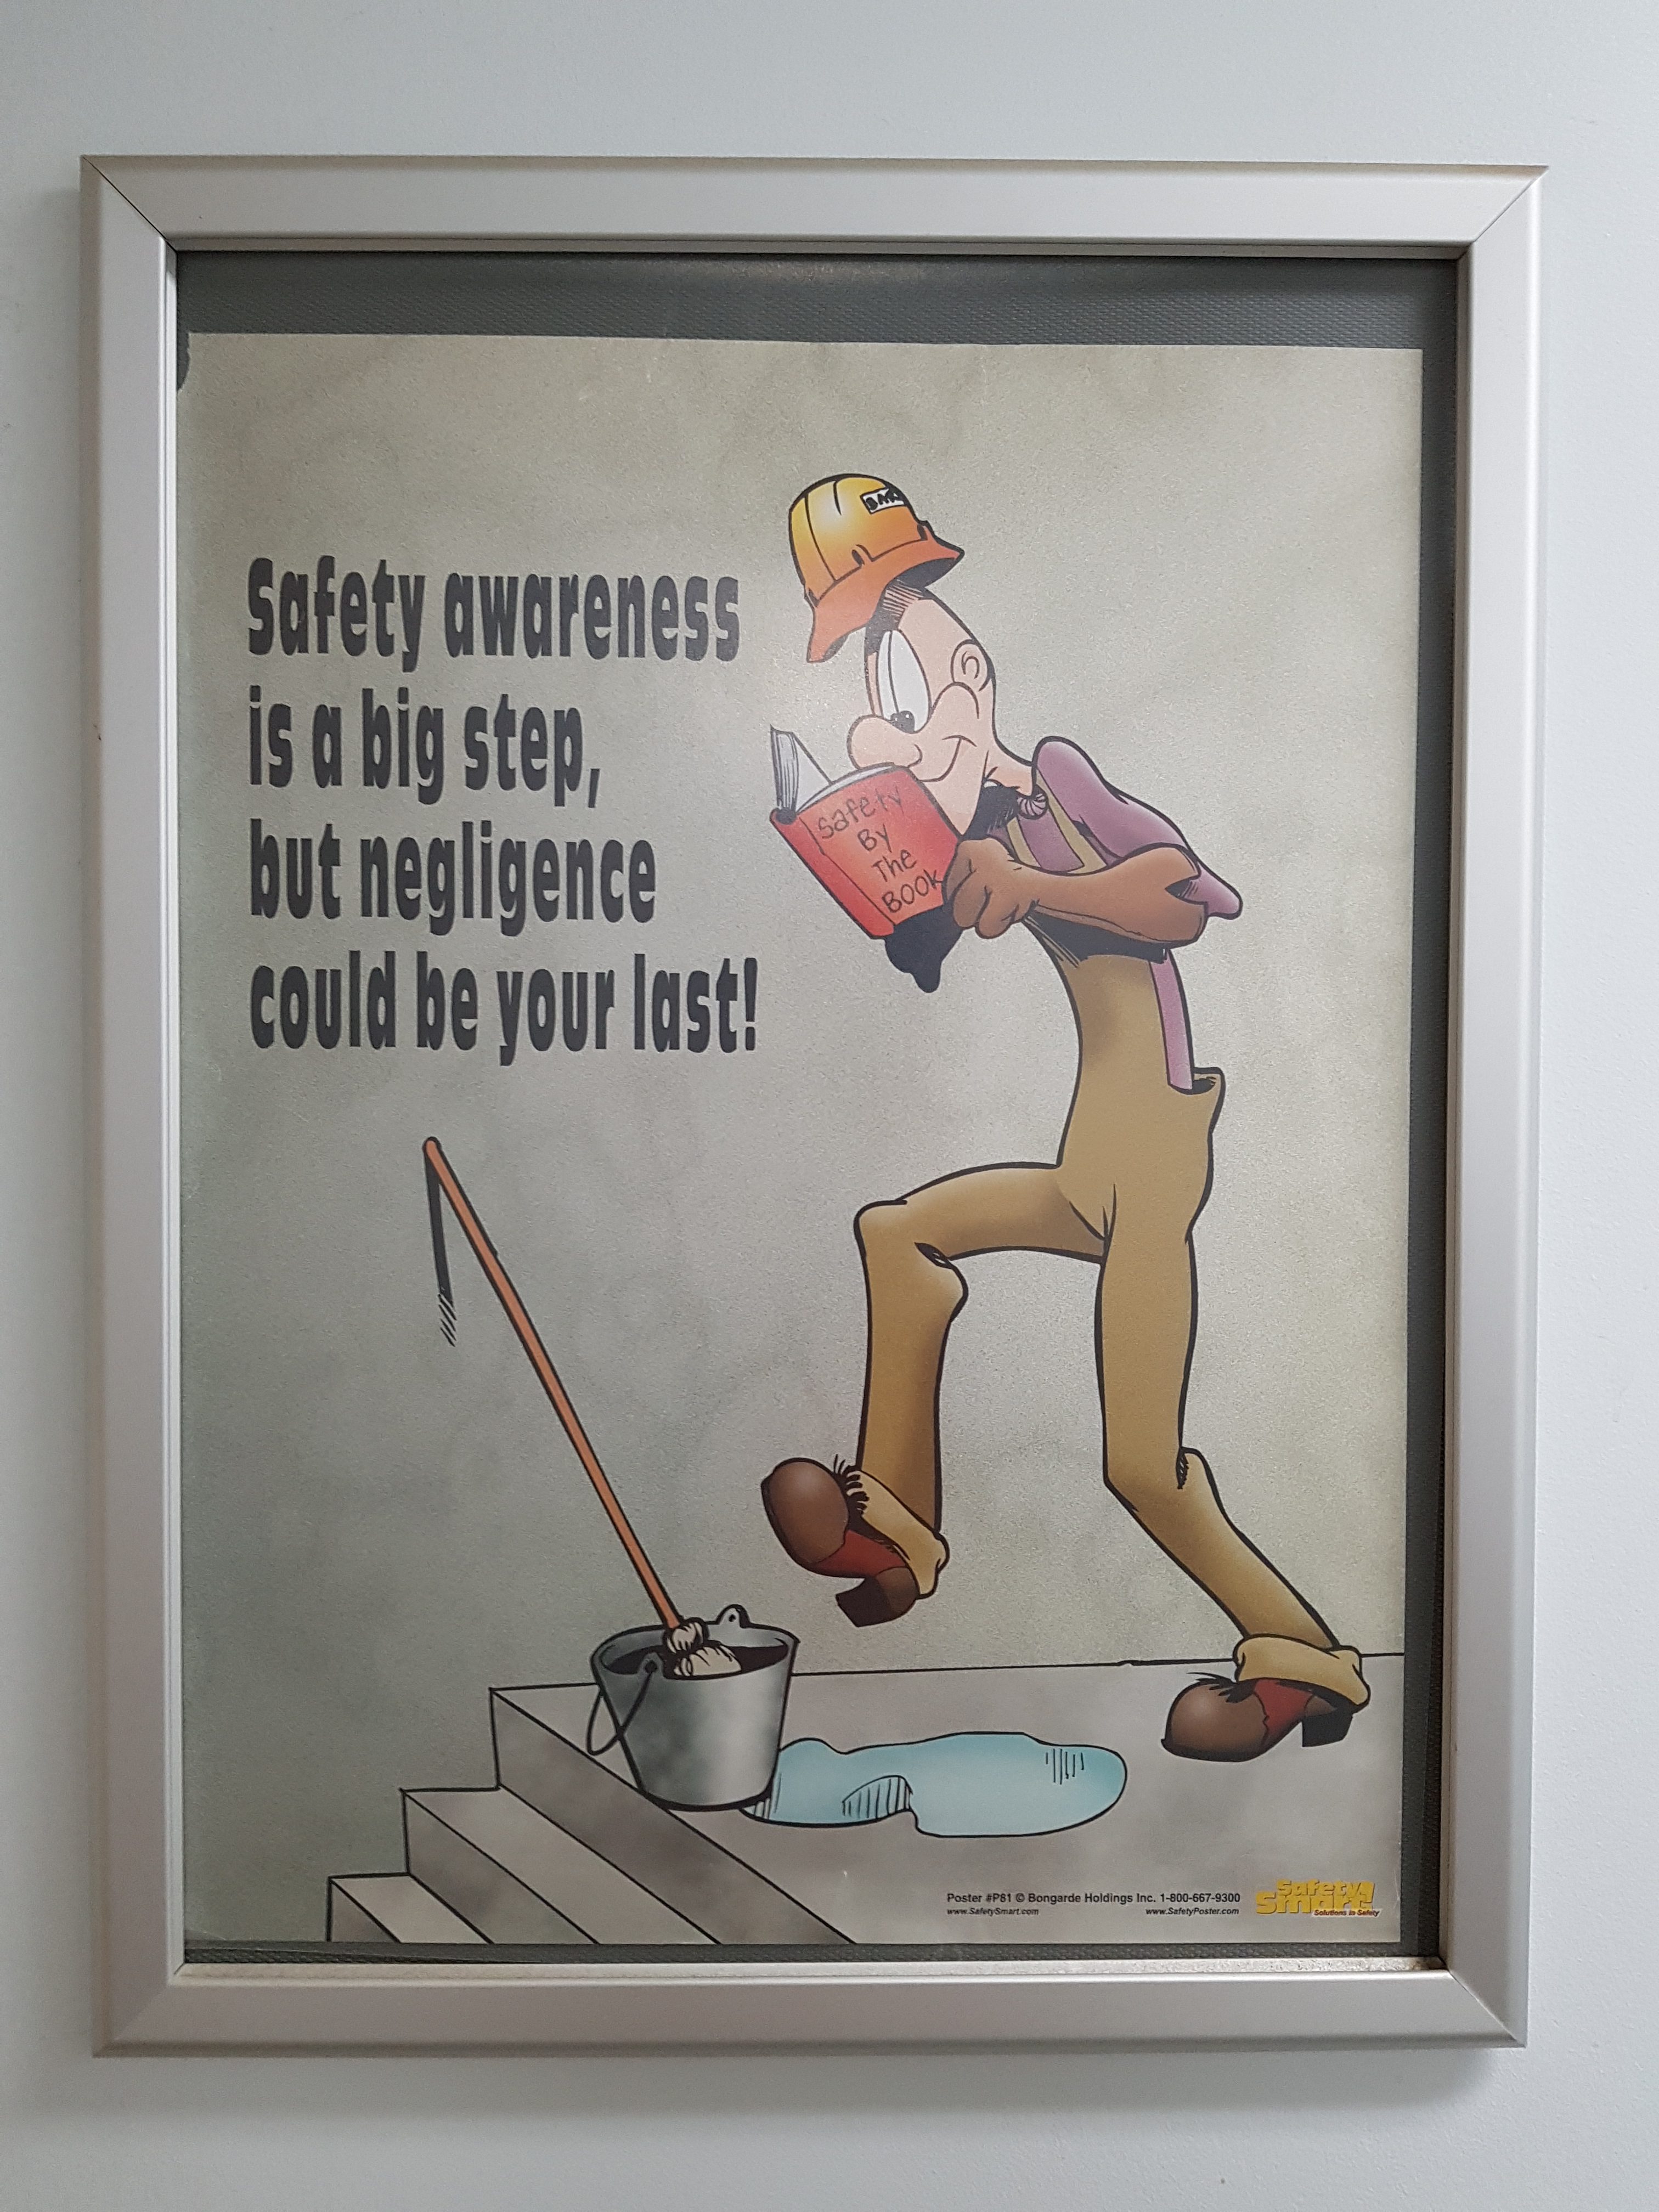 Animated posted about workplace safety